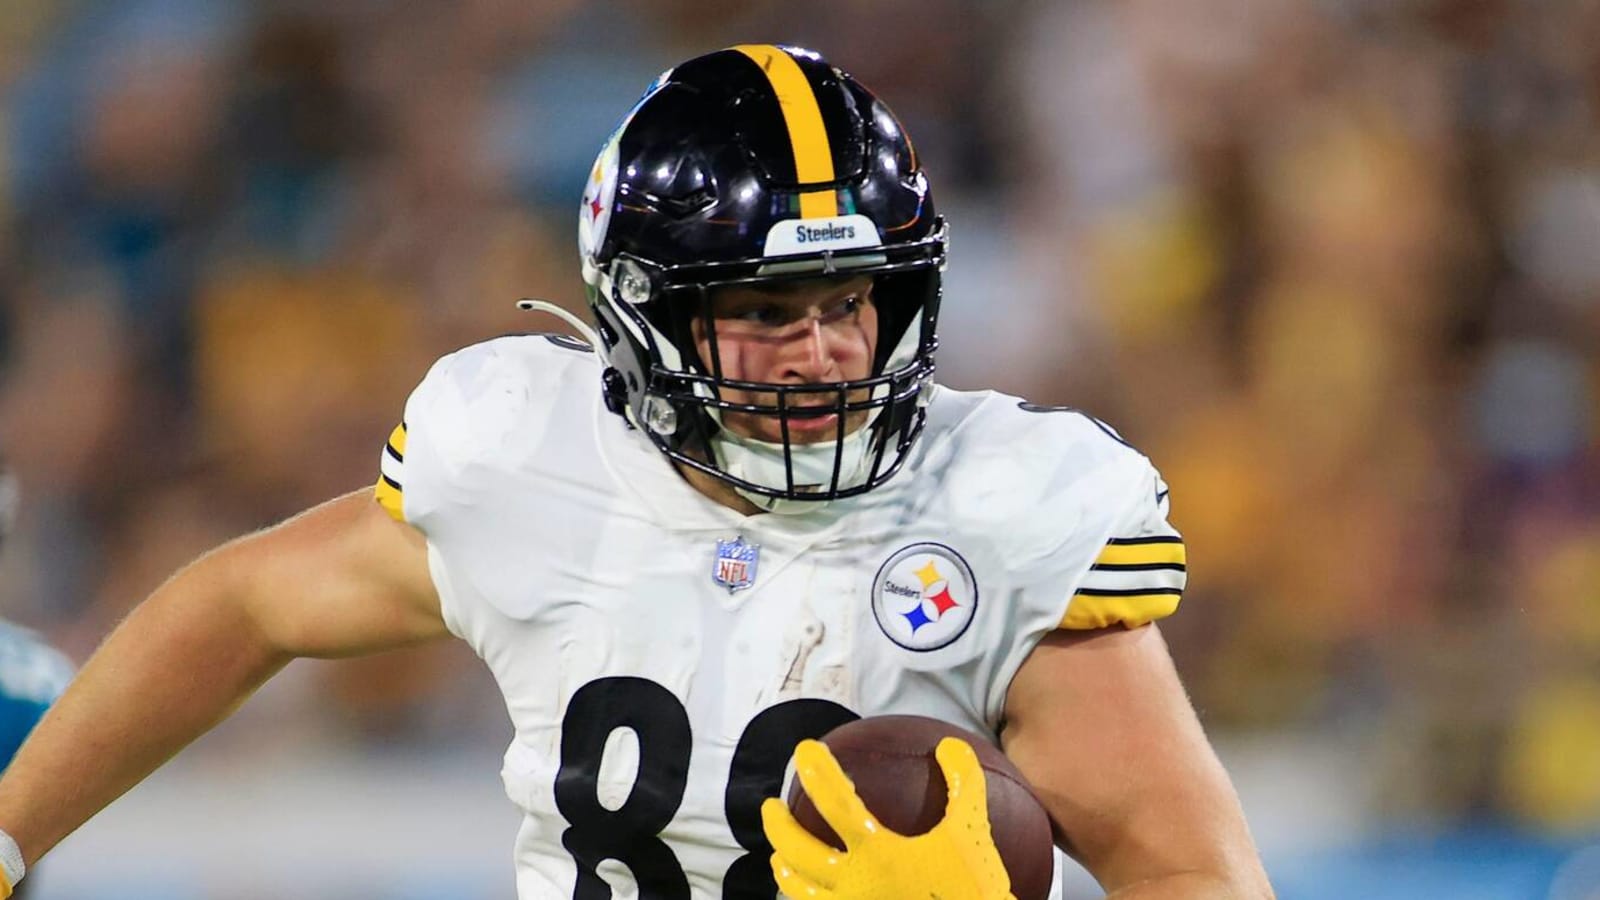 Steelers will have another big playmaker back in Week 7